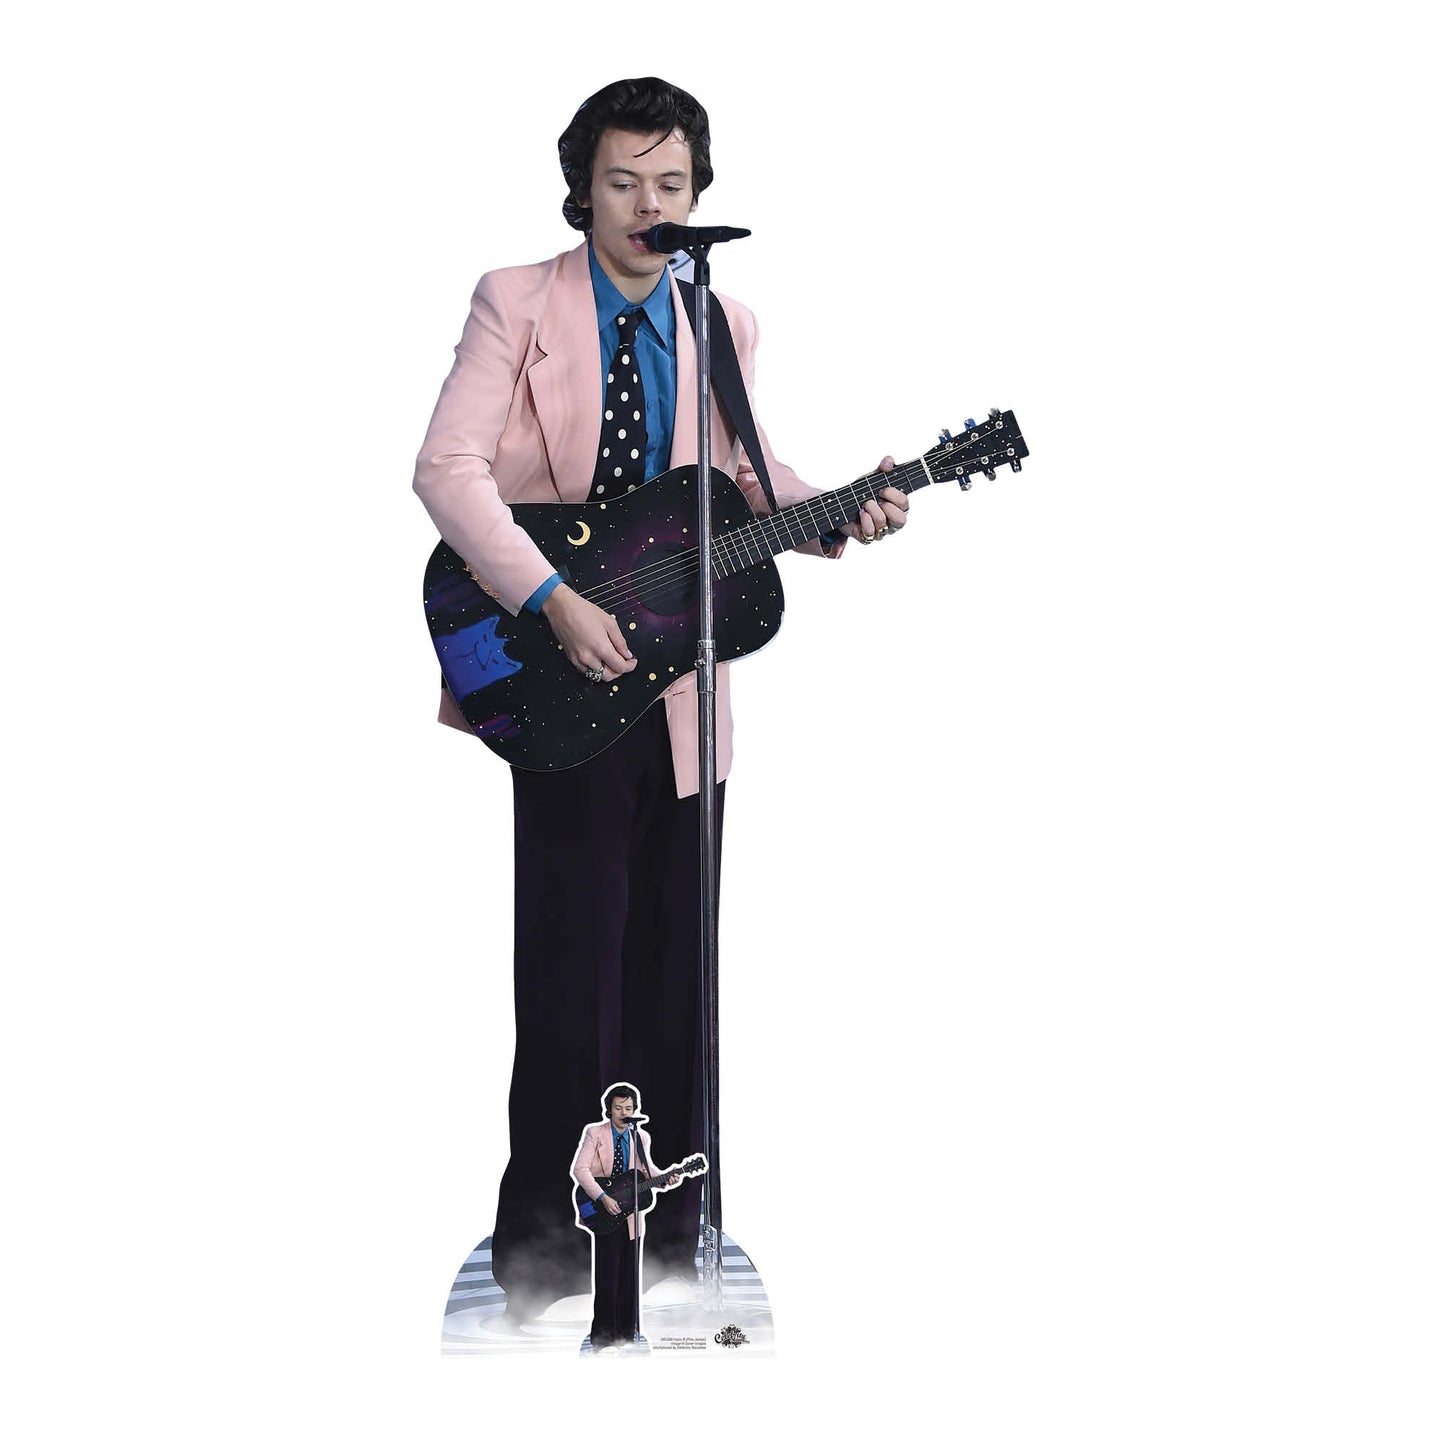 CS1026 Harry Styles Pink Jacket Height 186cm Lifesize Cardboard Cut Out With Mini